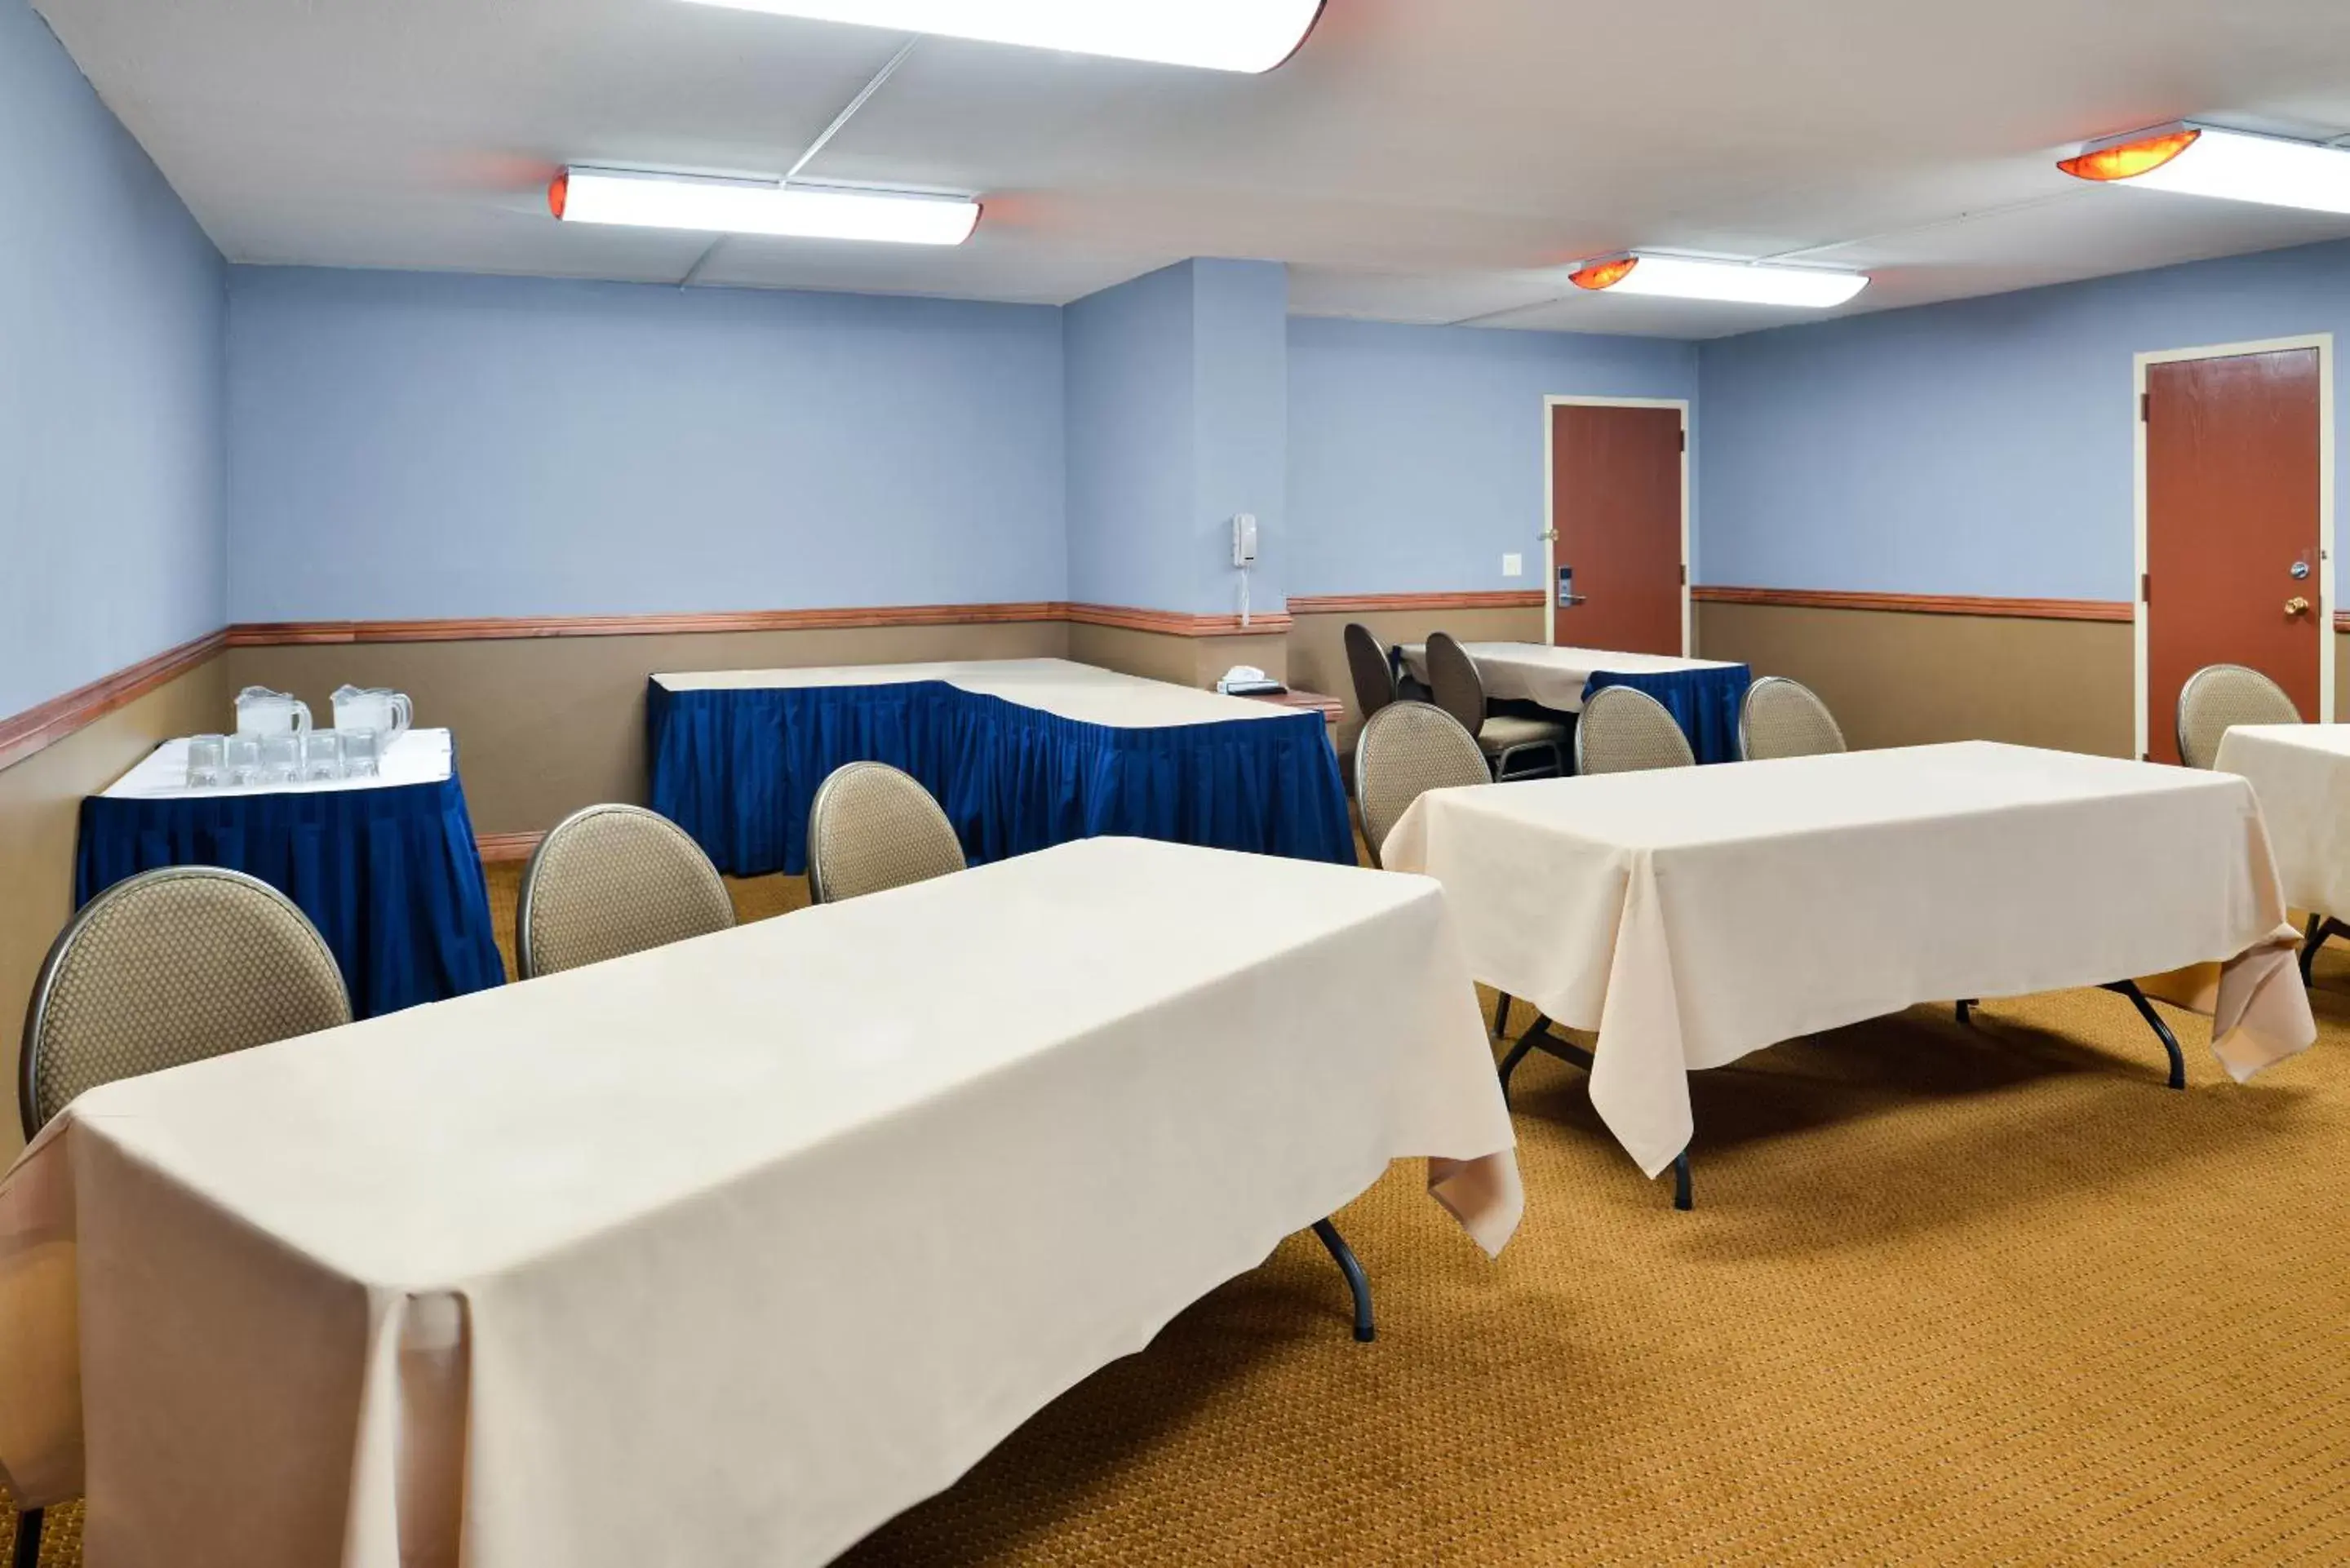 Meeting/conference room in Billings Hotel & Convention Center